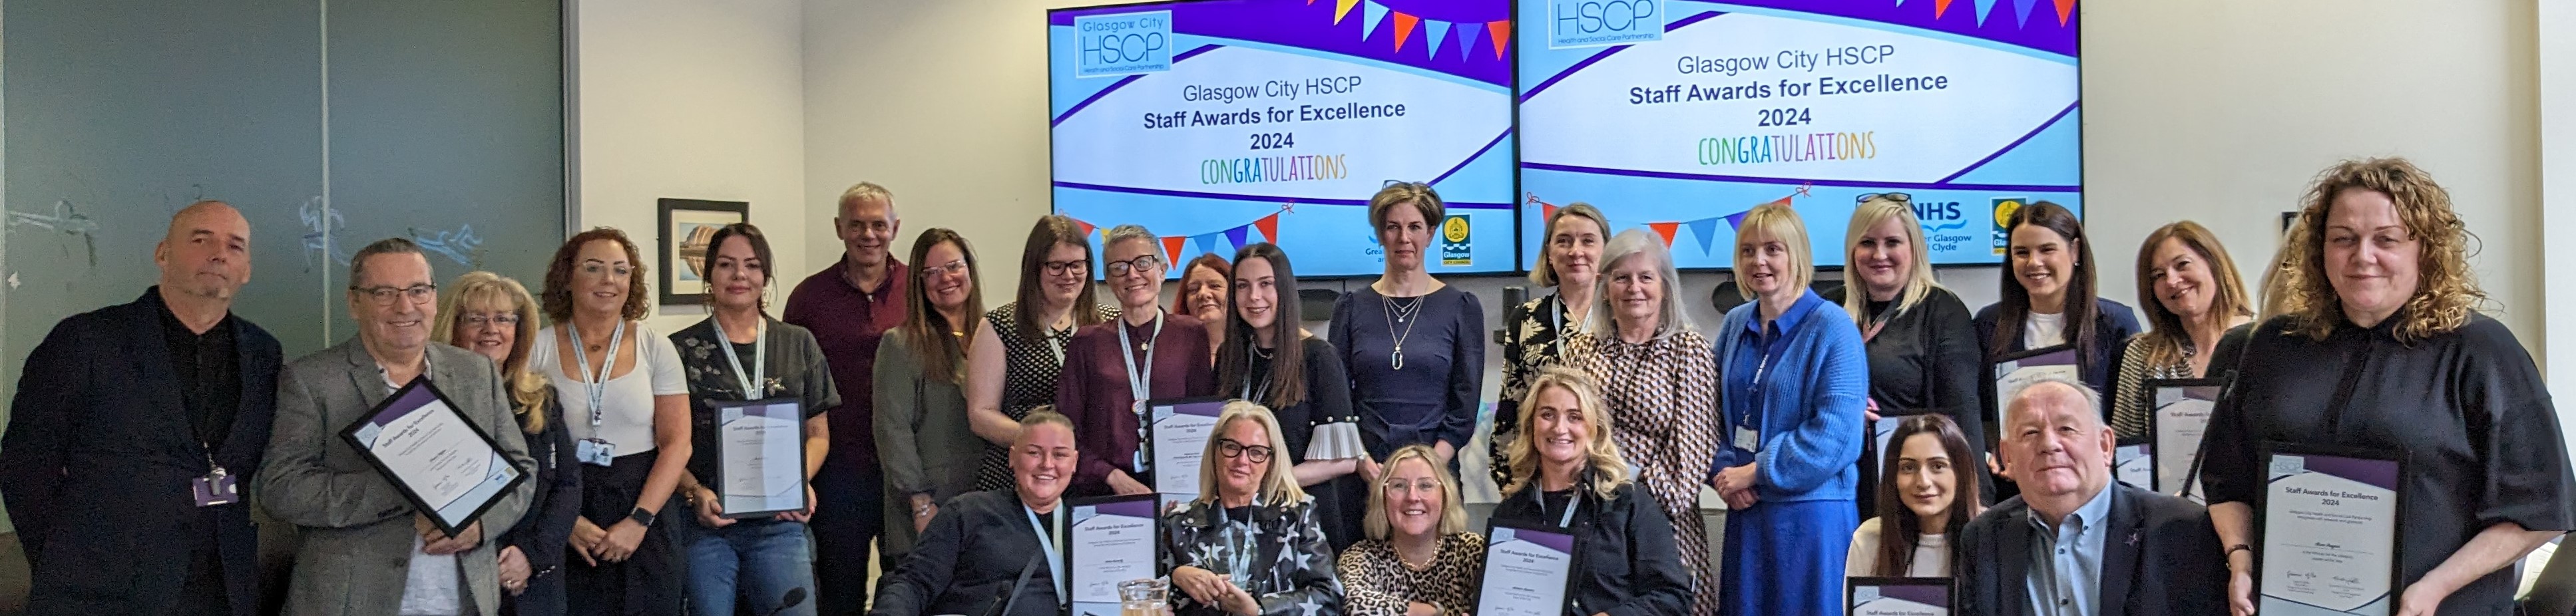 Glasgow City HSCP Staff Awards 2024  Winners and Commendations.